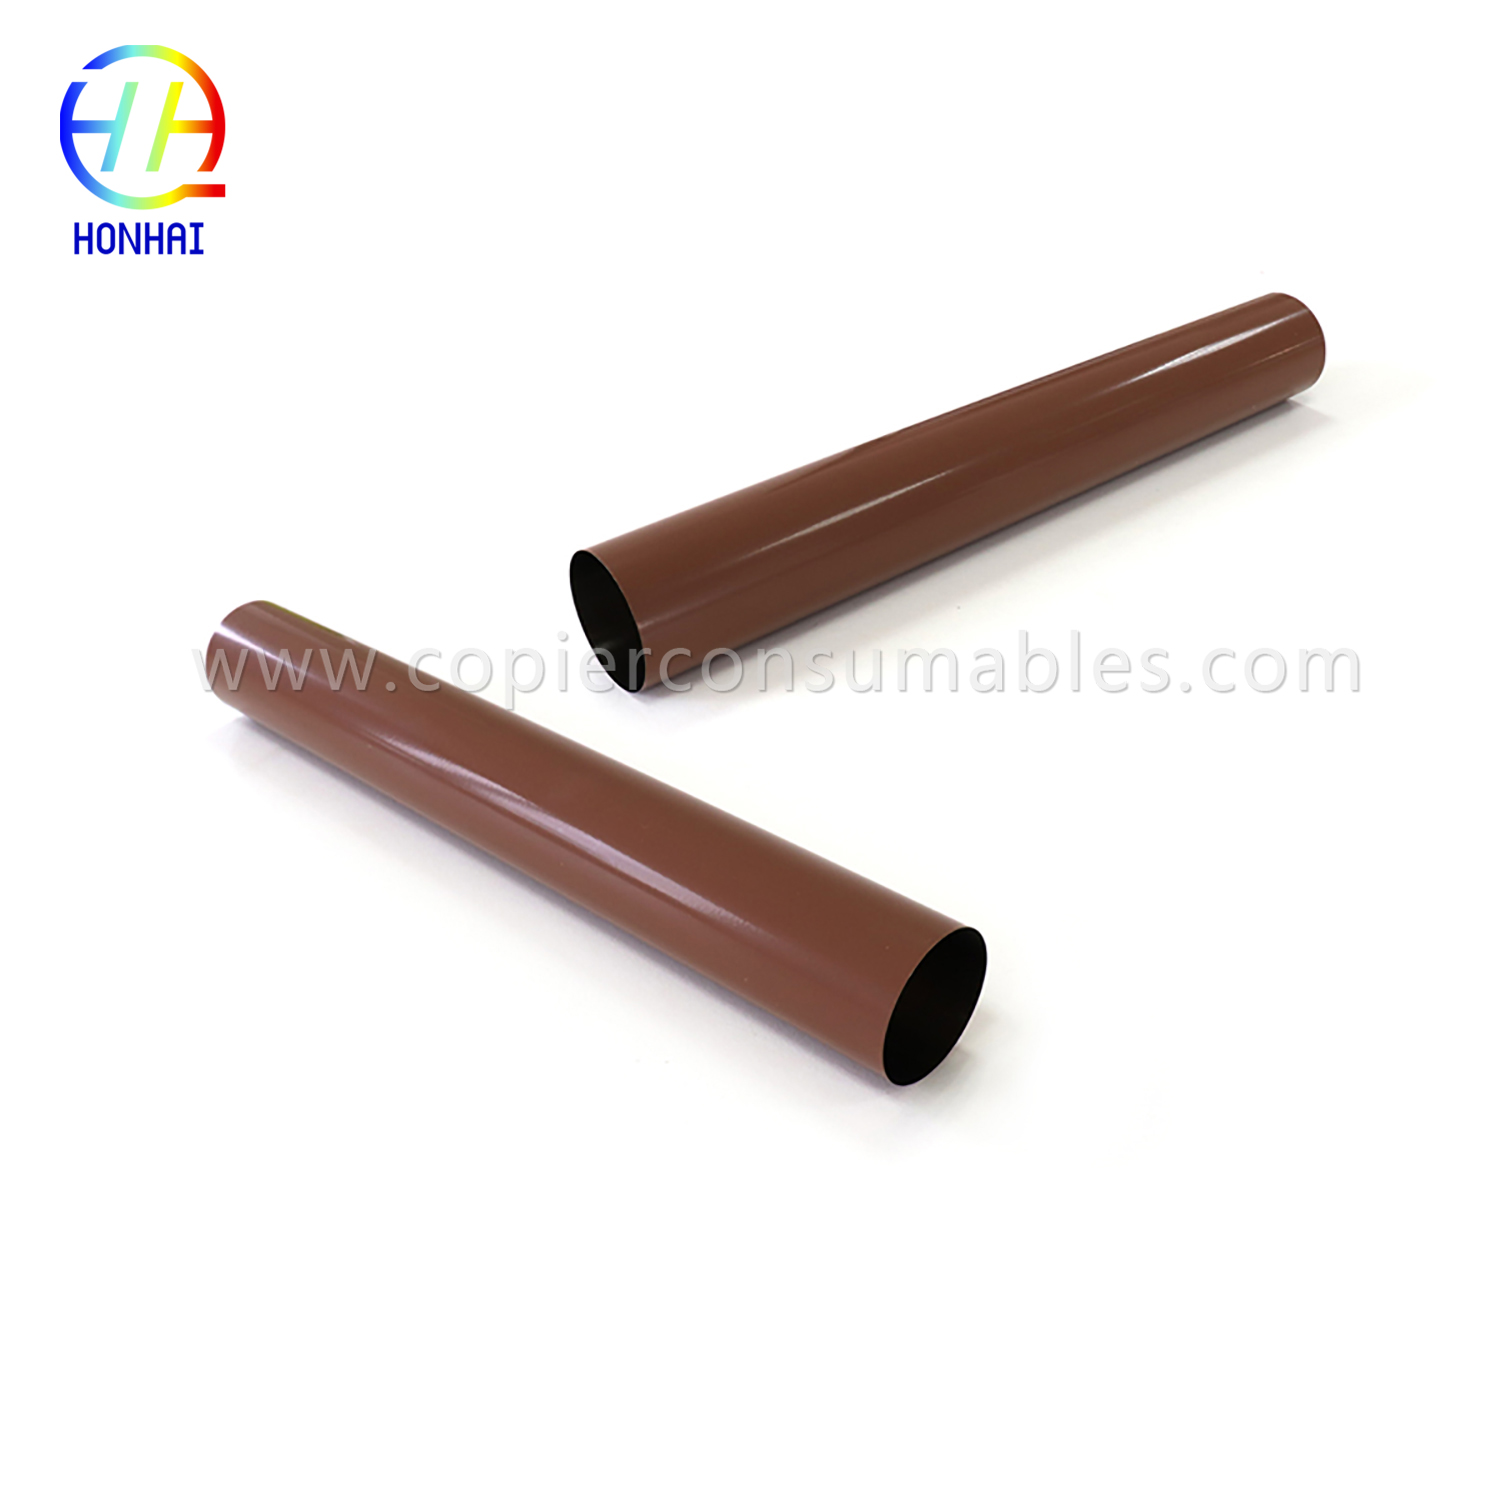 Fuser Film Sleeve Brother HL-5440 5445 5450 6180 MFC-8510 8520 8710 8810 8910 8950 DCP-8110 8150 8155 8250 拷贝